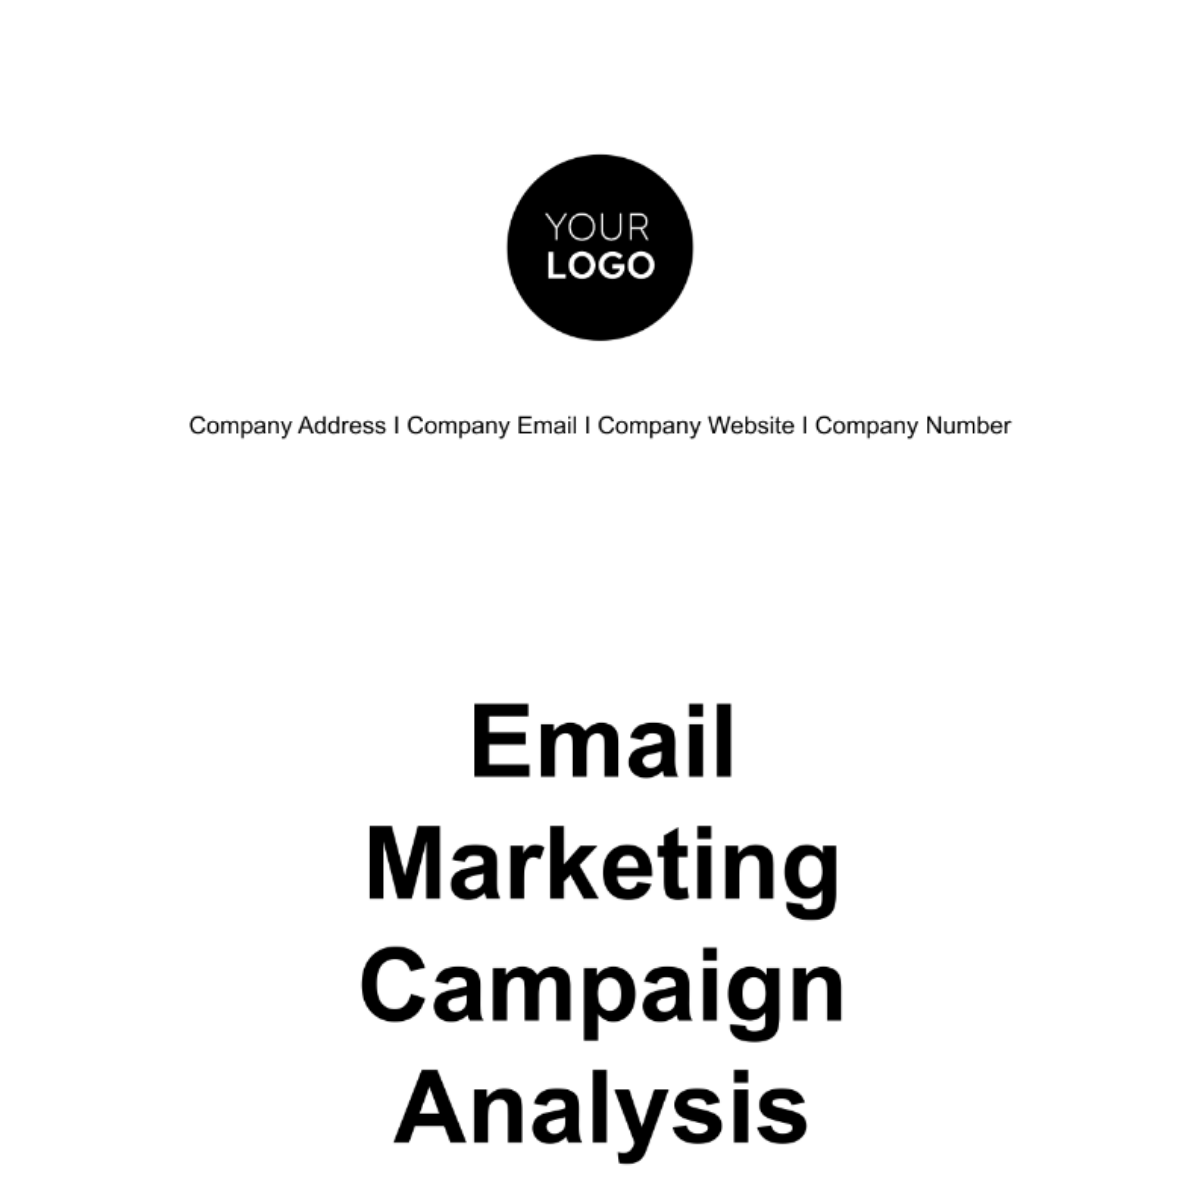 Free Email Marketing Campaign Analysis Template